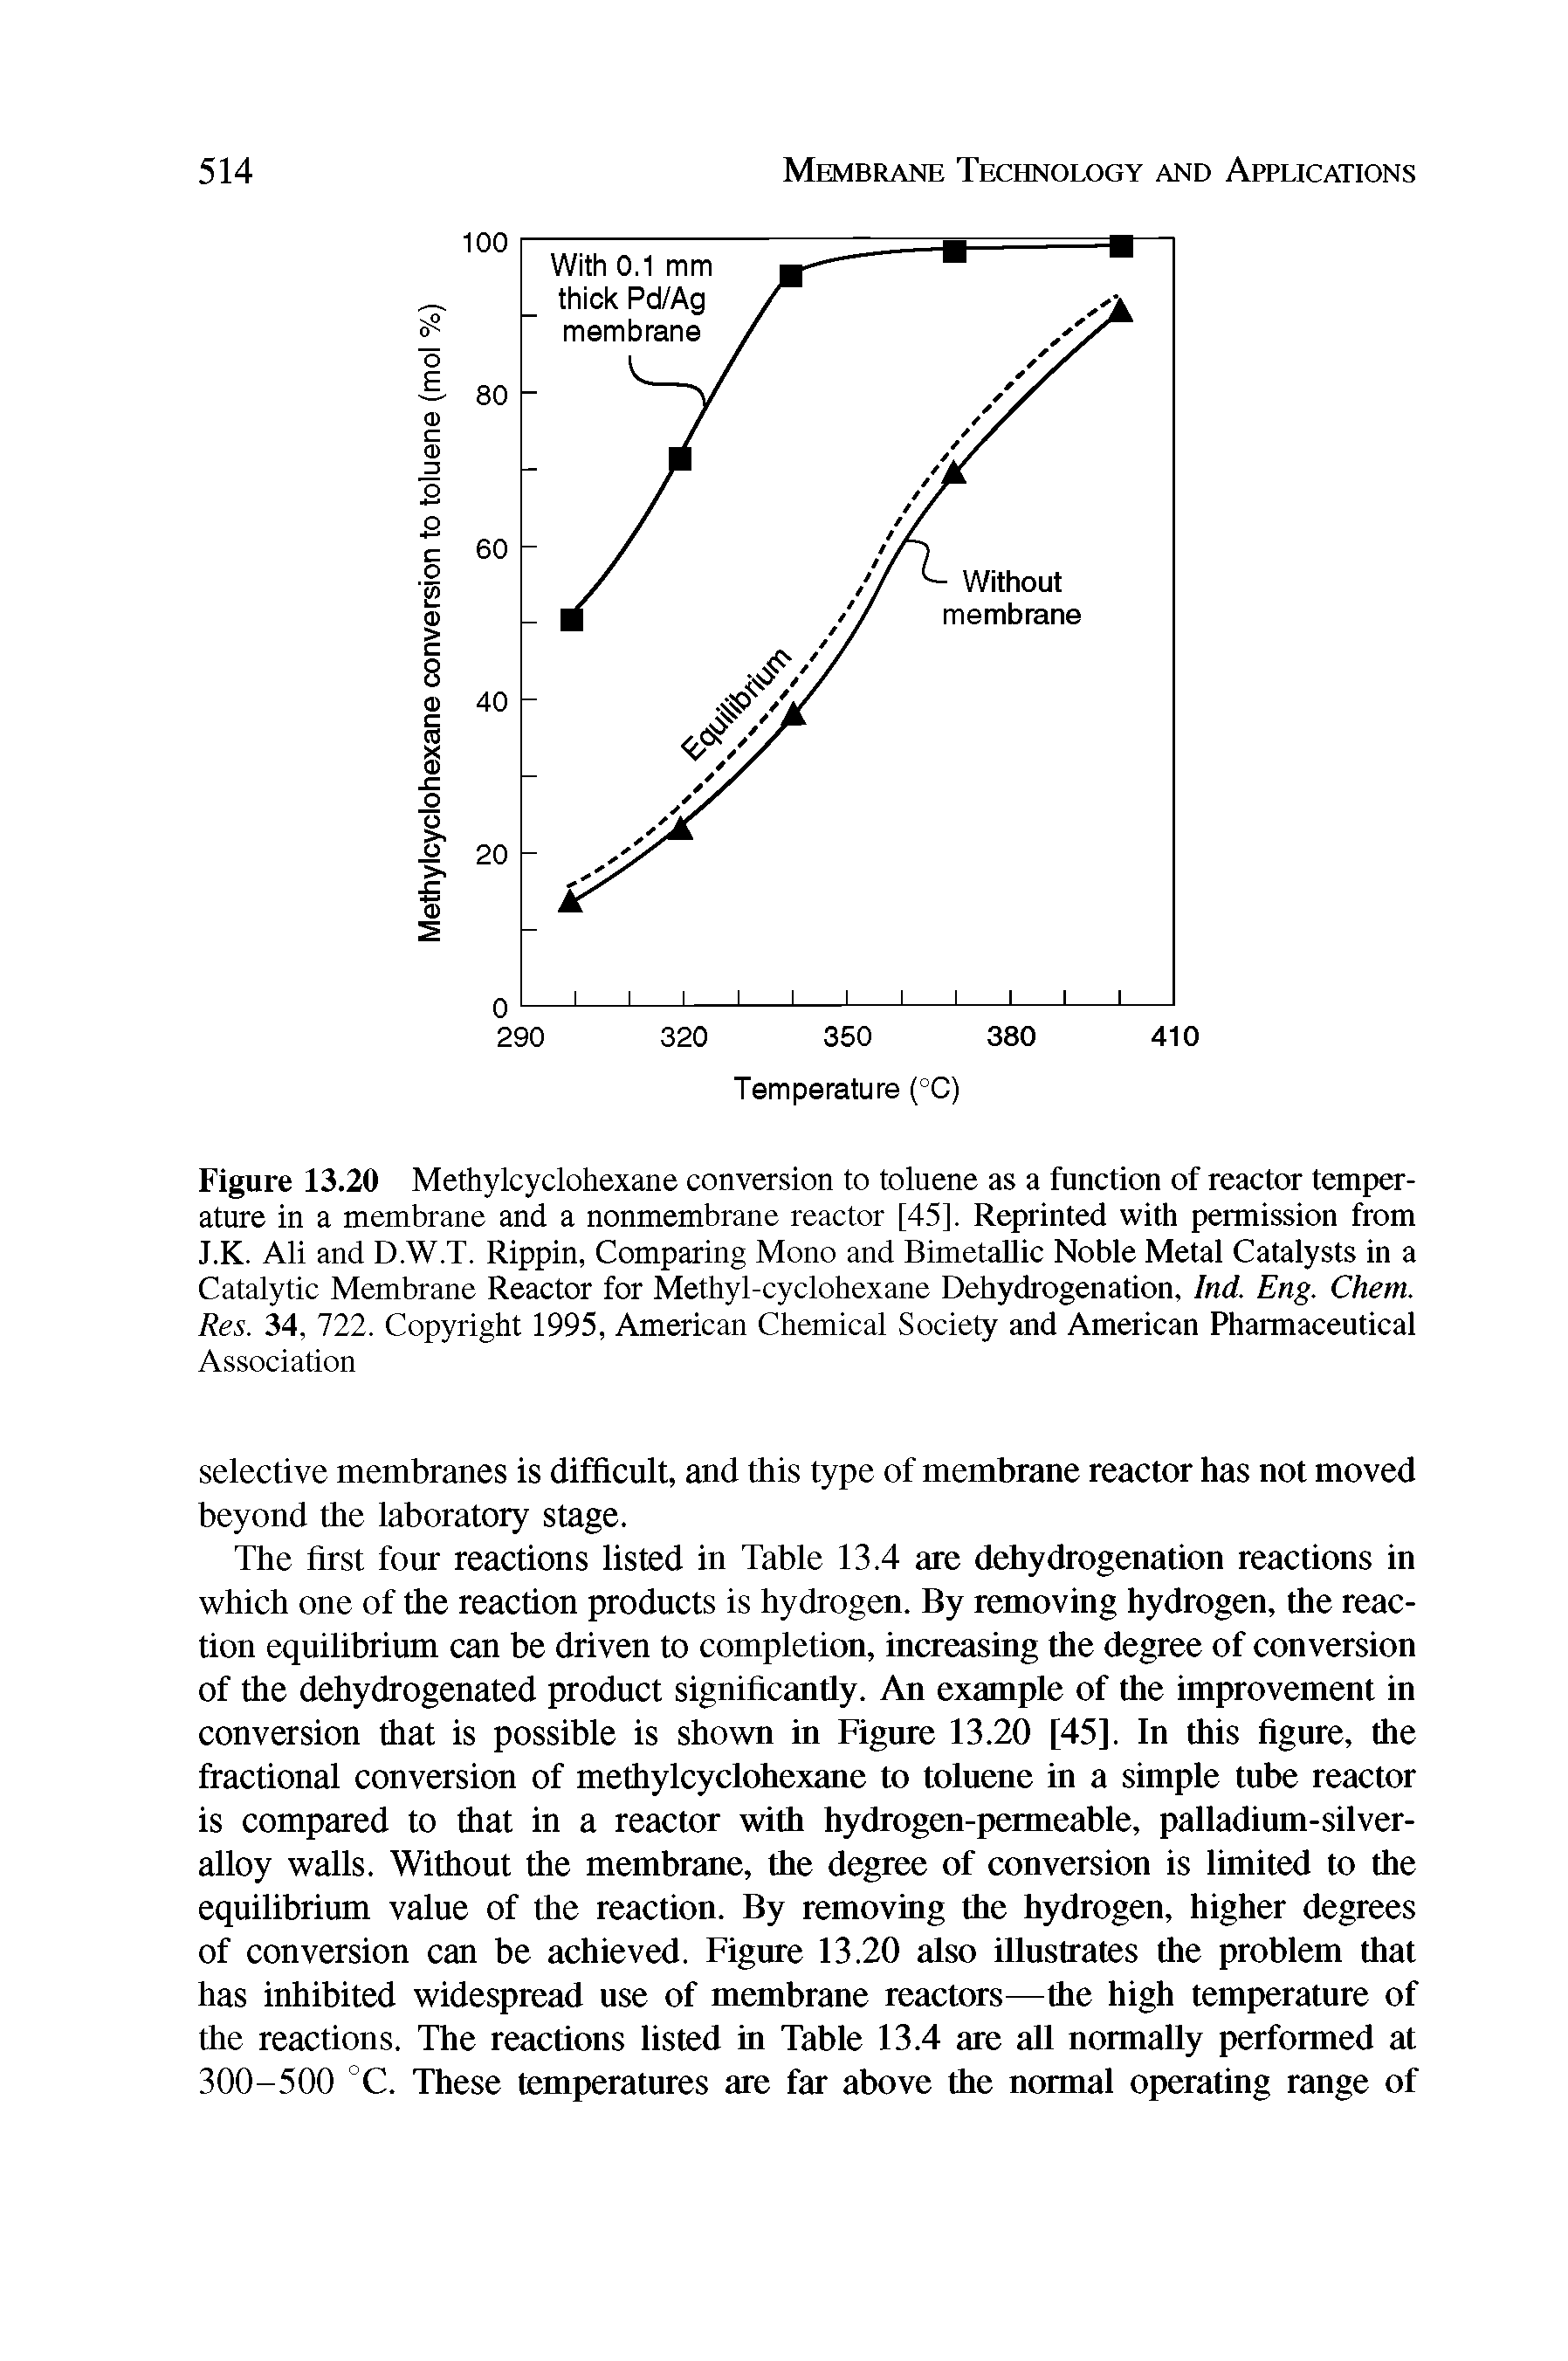 Figure 13.20 Methylcyclohexane conversion to toluene as a function of reactor temperature in a membrane and a nonmembrane reactor [45]. Reprinted with permission from J.K. Ali and D.W.T. Rippin, Comparing Mono and Bimetallic Noble Metal Catalysts in a Catalytic Membrane Reactor for Methyl-cyclohexane Dehydrogenation, Ind. Eng. Chem. Res. 34, 722. Copyright 1995, American Chemical Society and American Pharmaceutical Association...